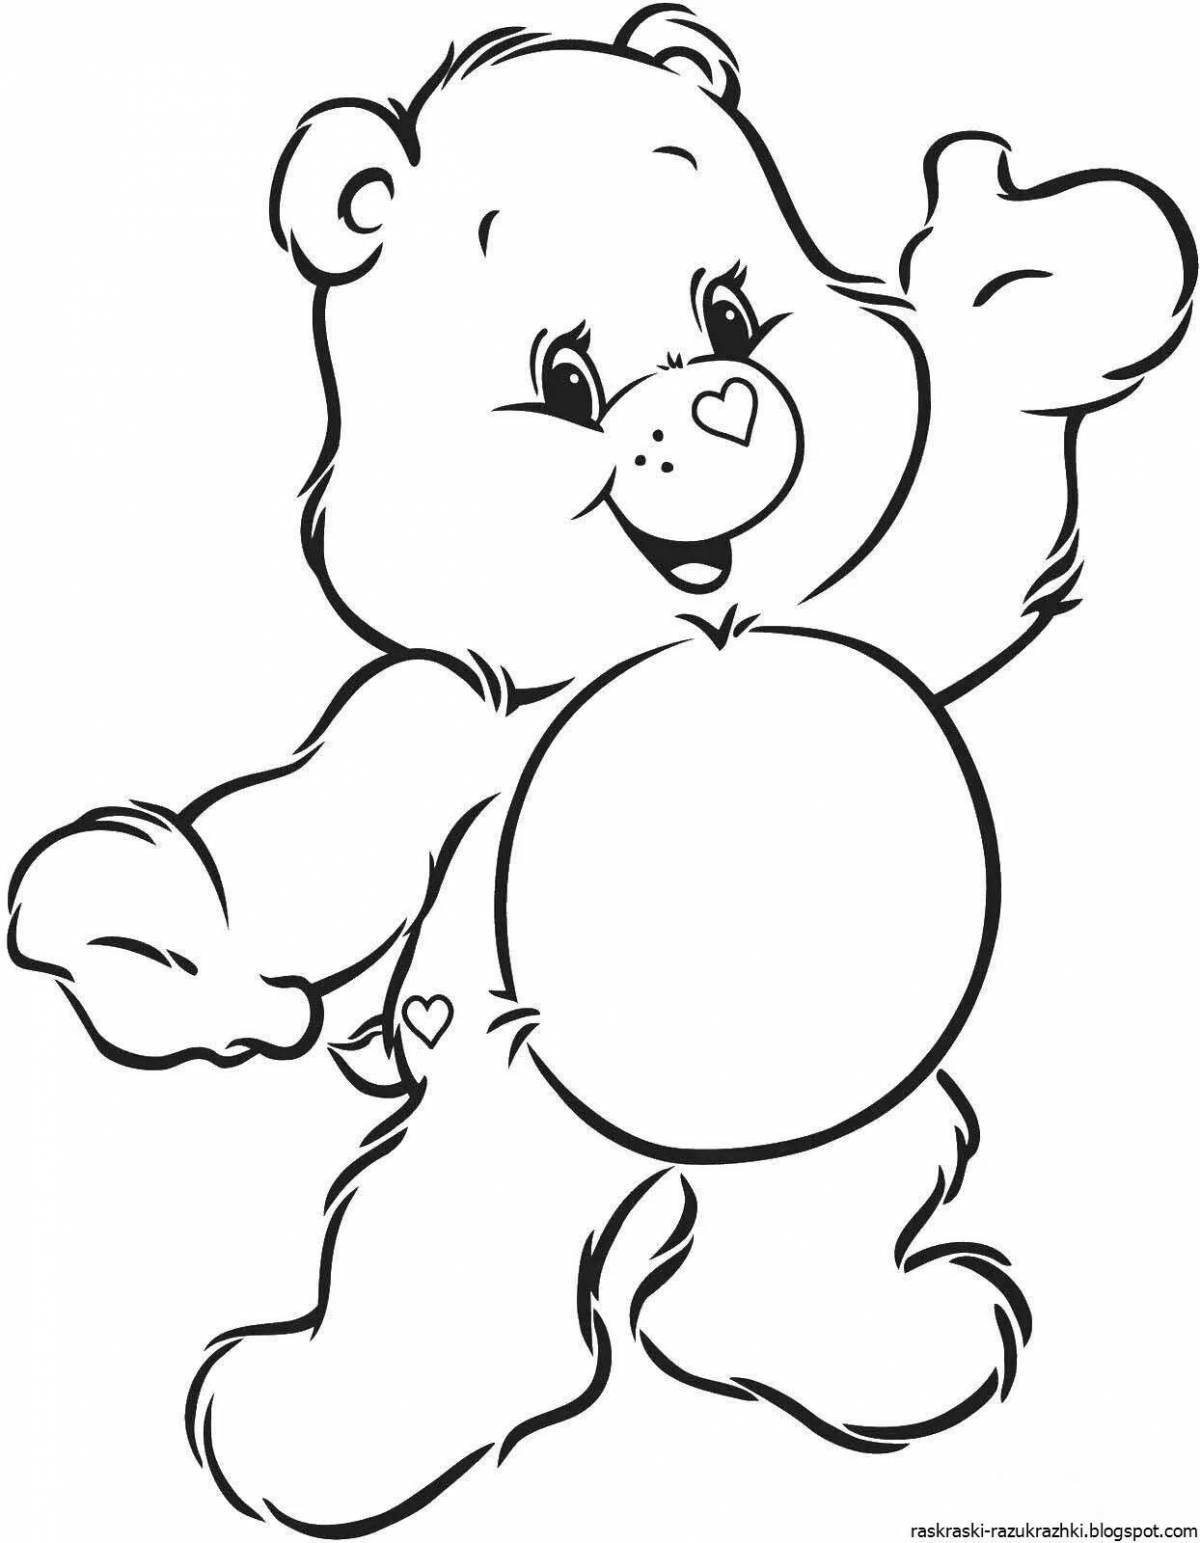 Bear picture for kids #1